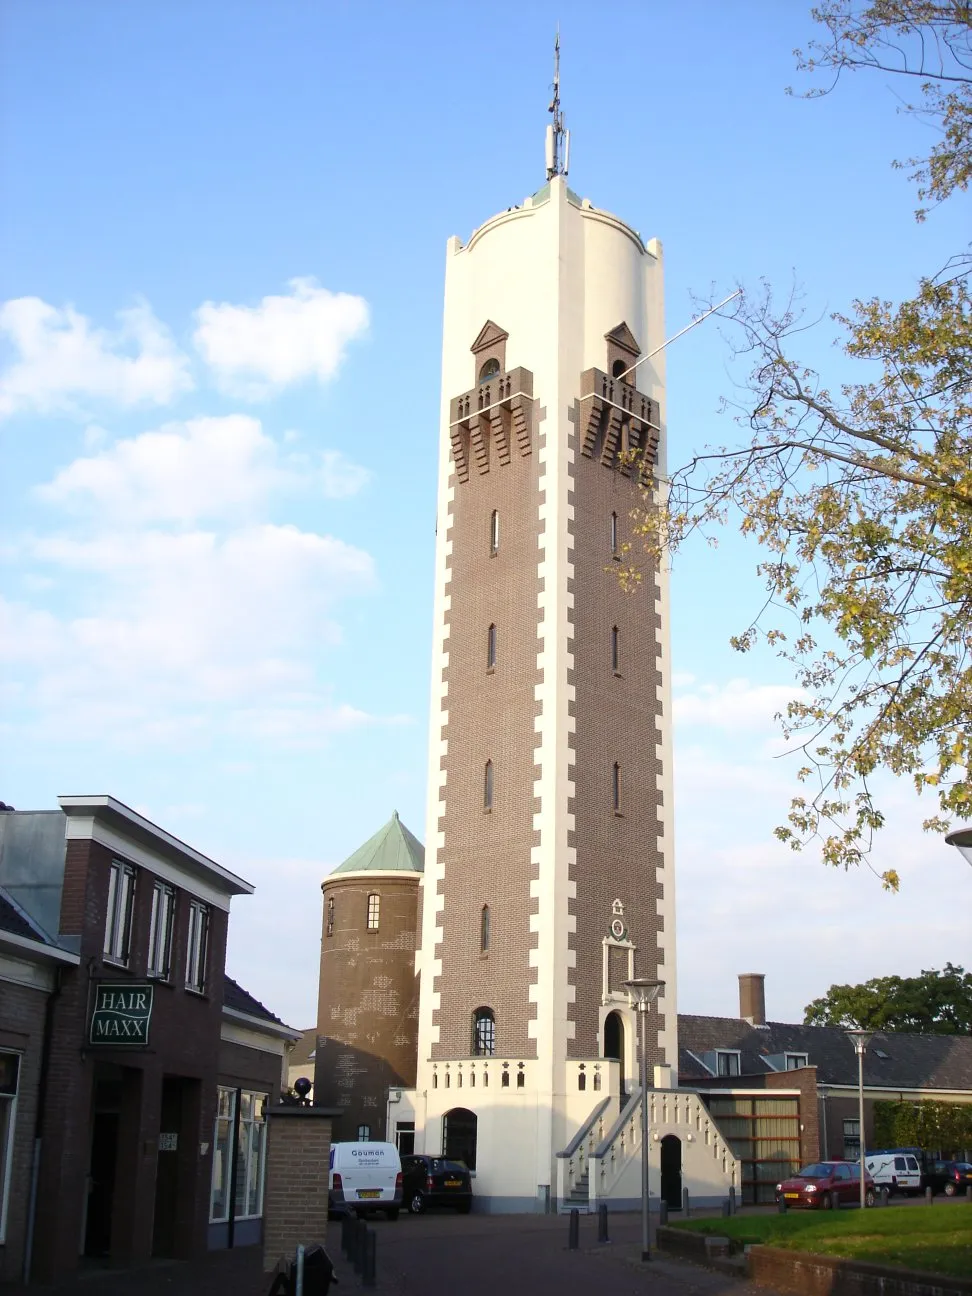 Photo showing: The water tower in the Dutch town of Barendrecht